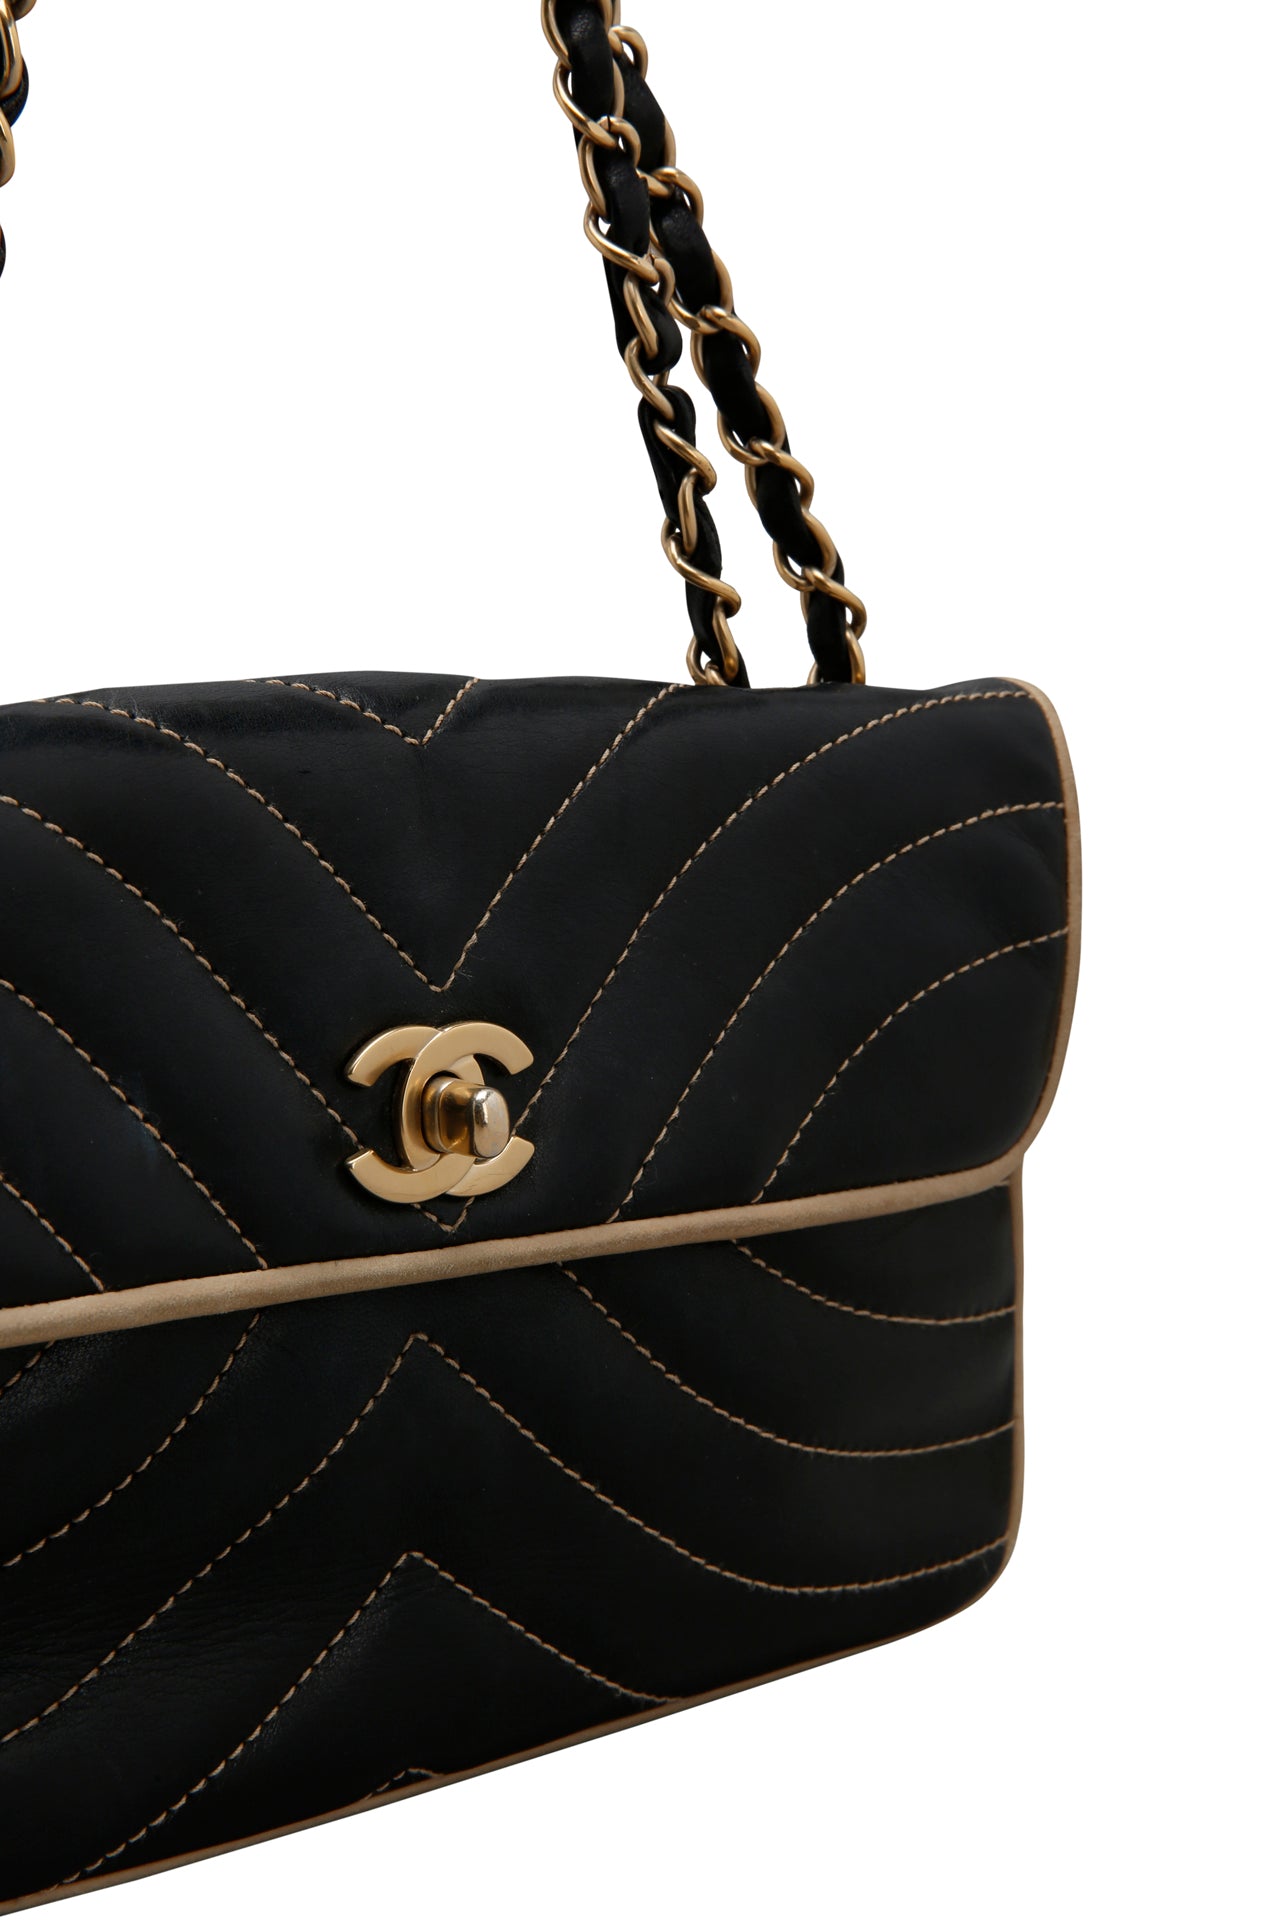 Chanel Navy Blue Chevron Contrast Quilted Lambskin Flap Bag